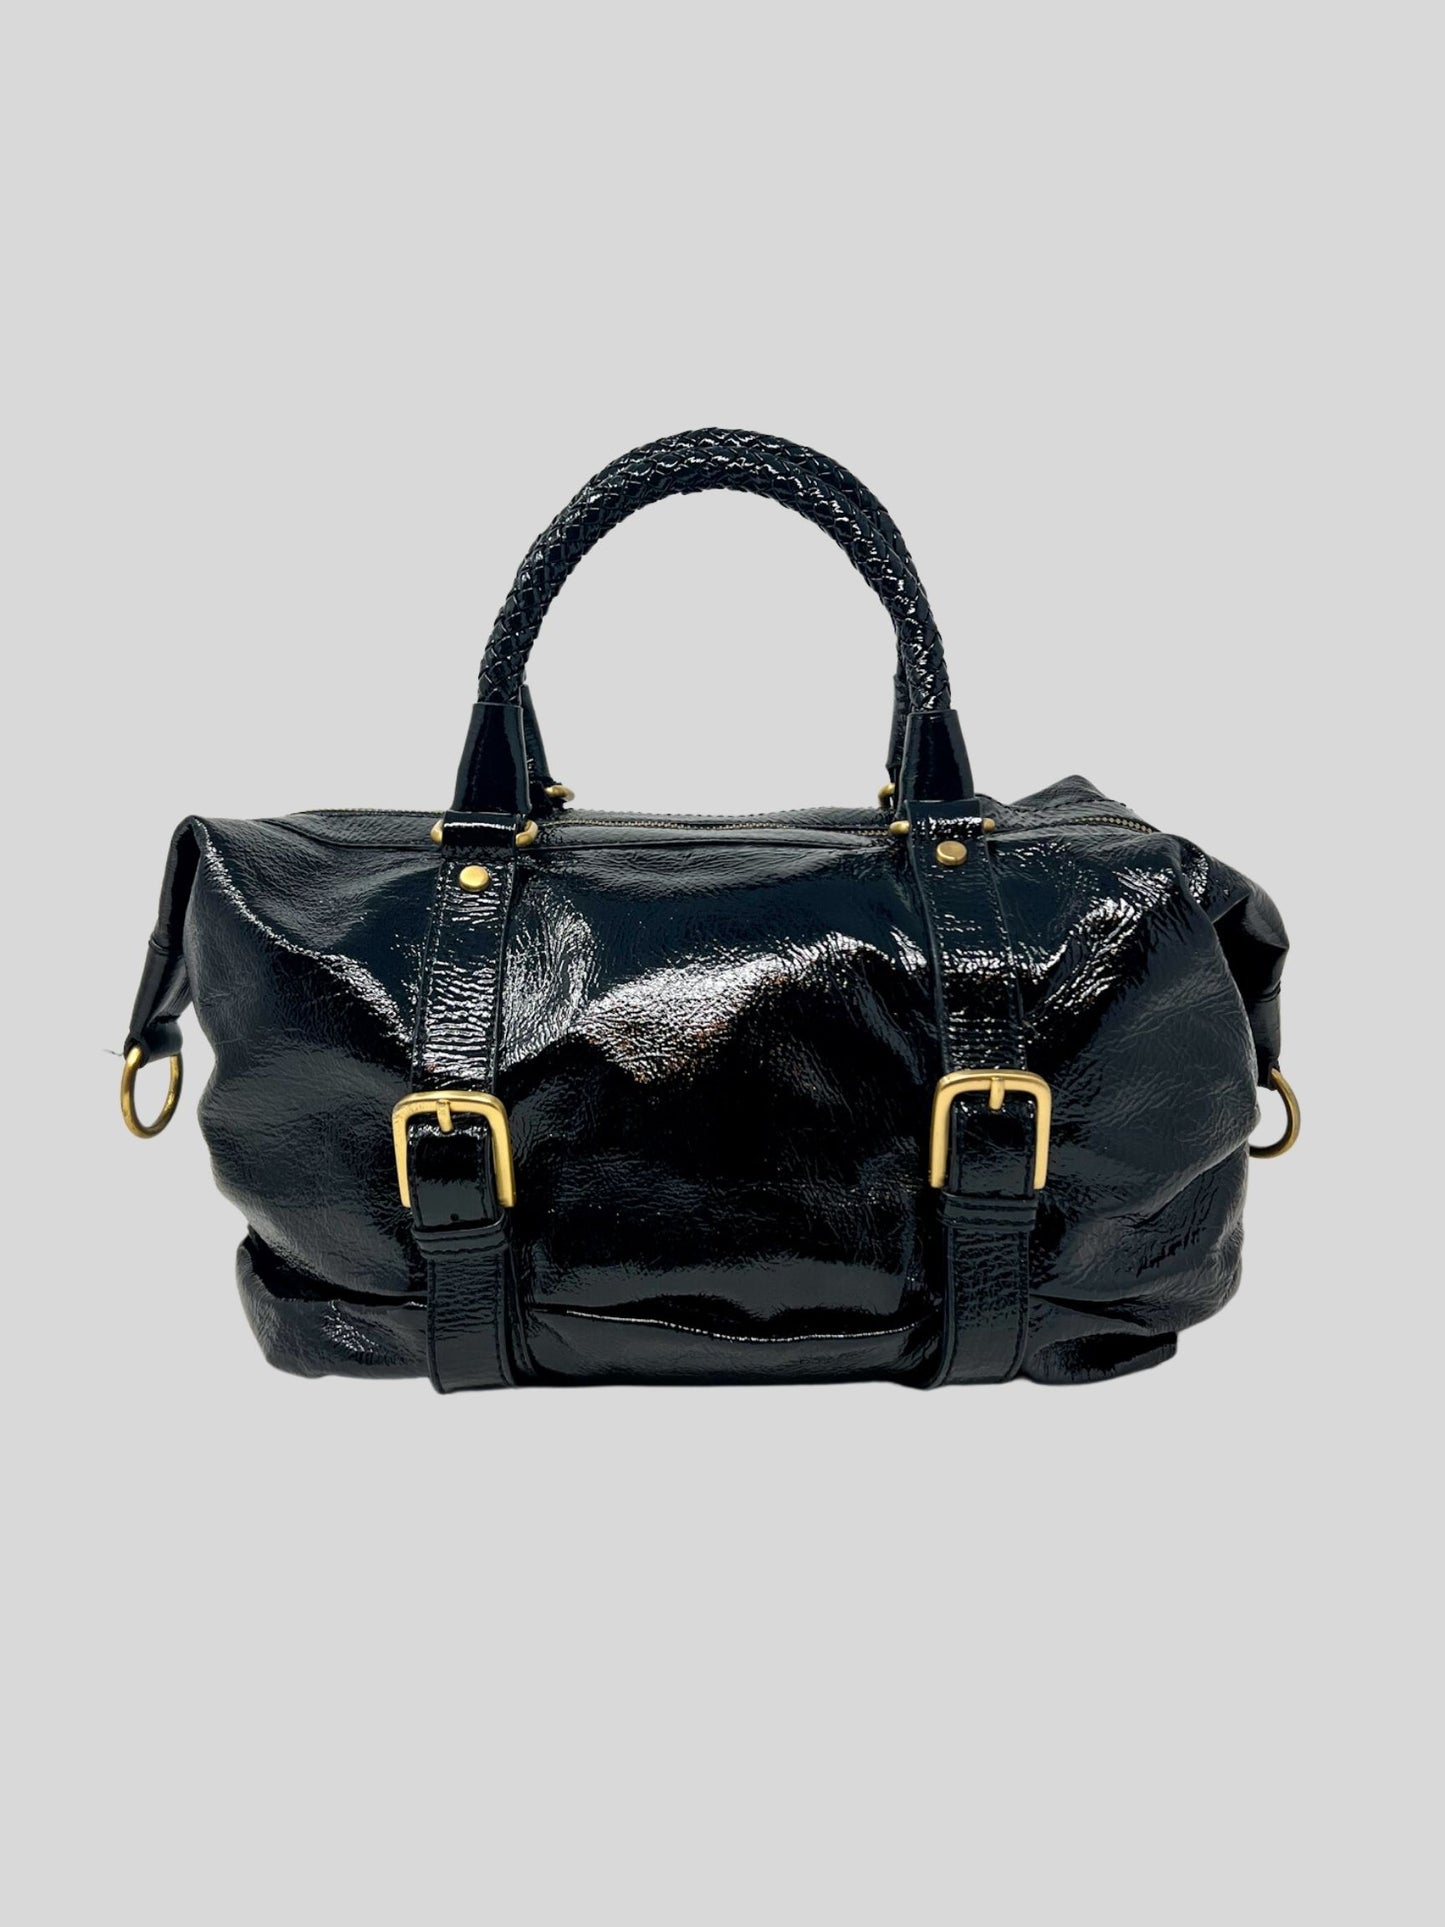 The SAK Convertible Satchel in black patent leather